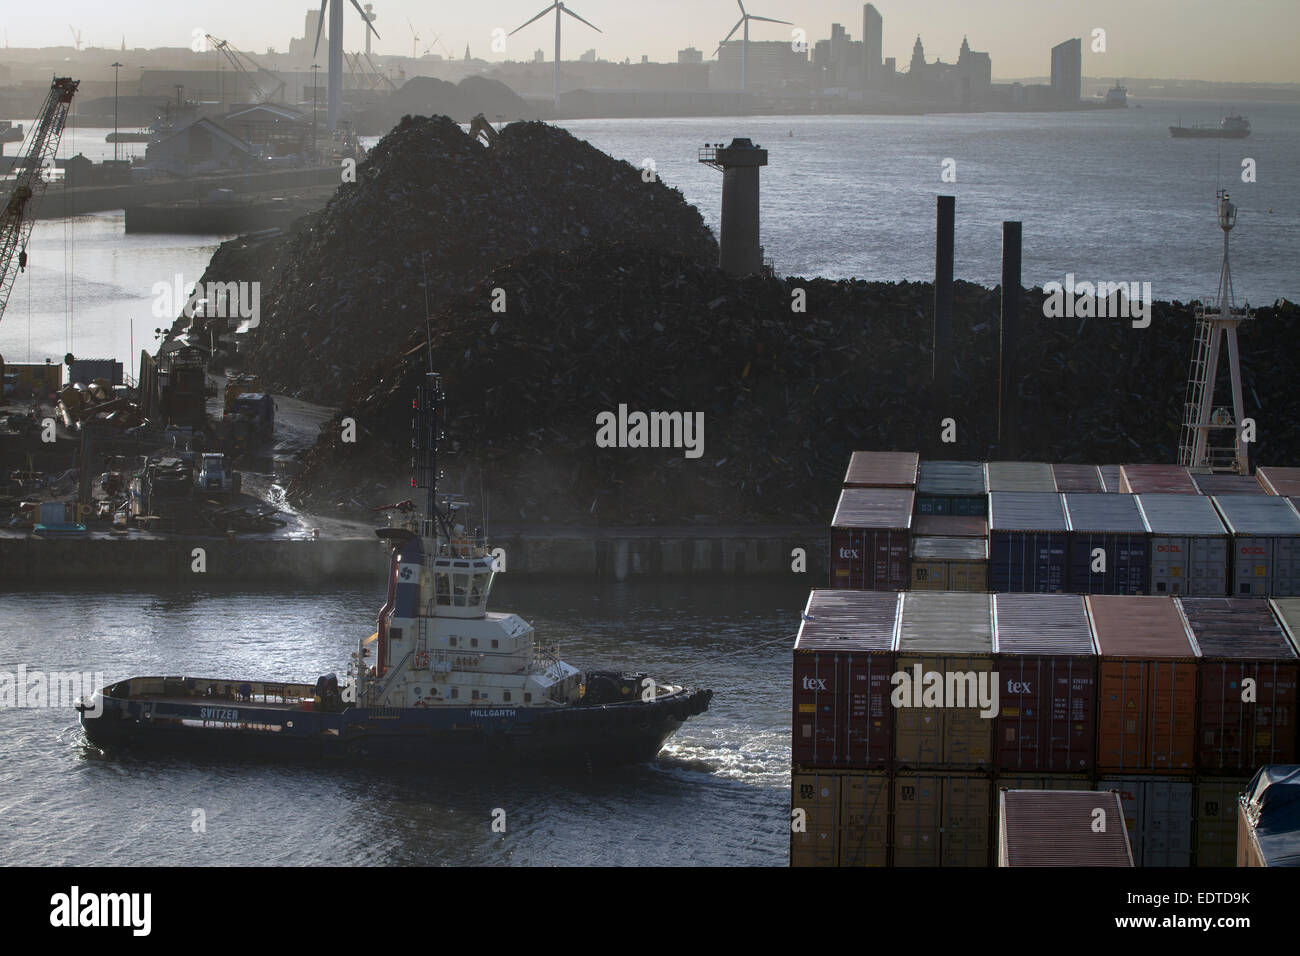 A tug pulling the Panama-registered container ship MSC Sandra, at the Seaforth Docks, Liverpool, England, UK. Stock Photo